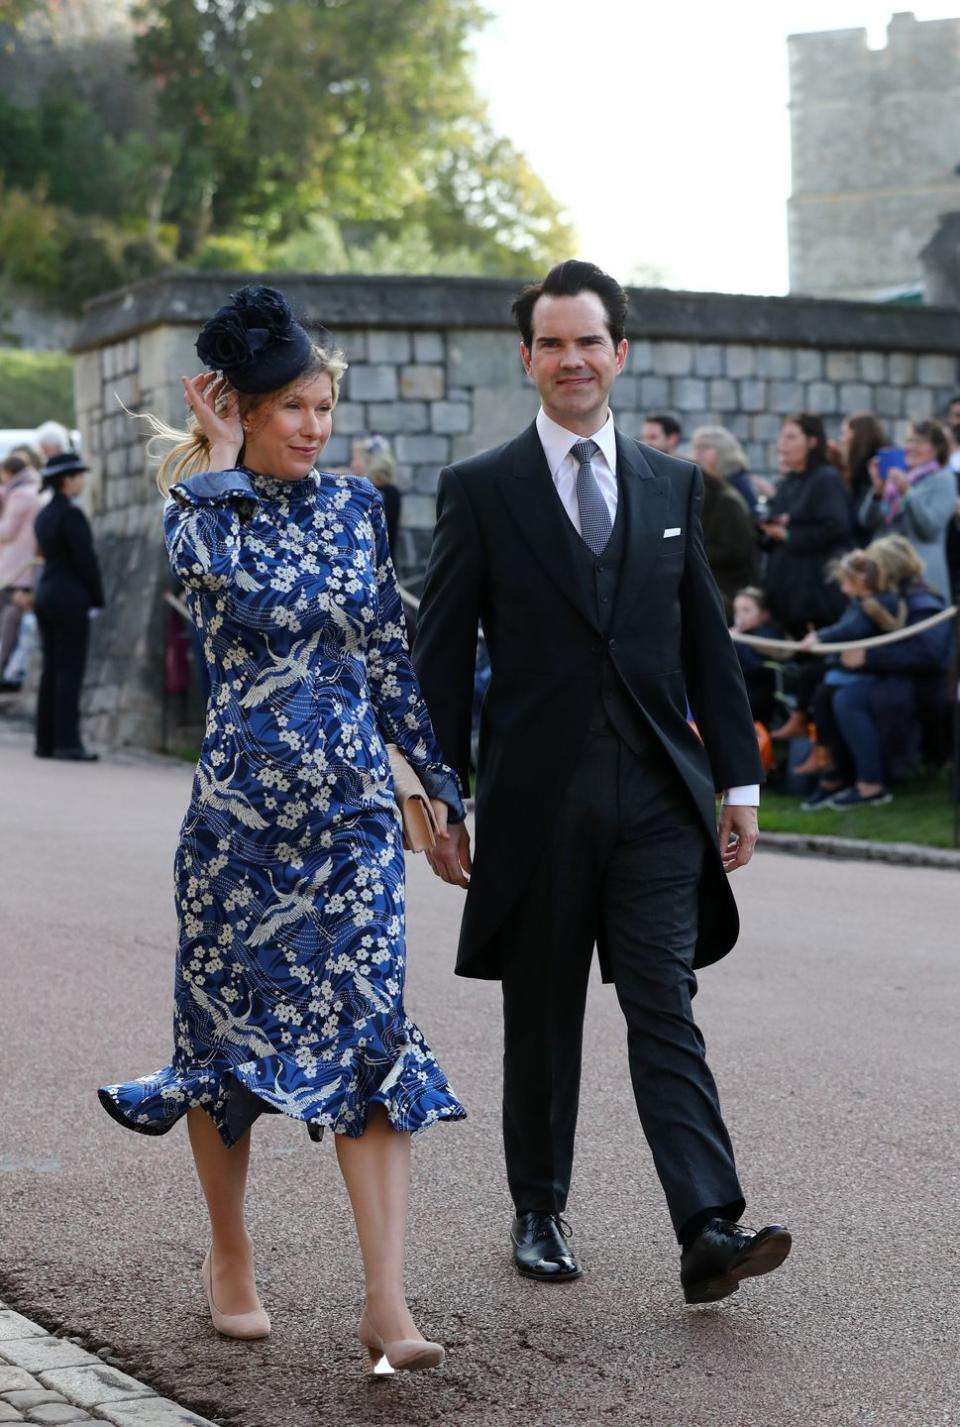 Karoline Copping and Jimmy Carr